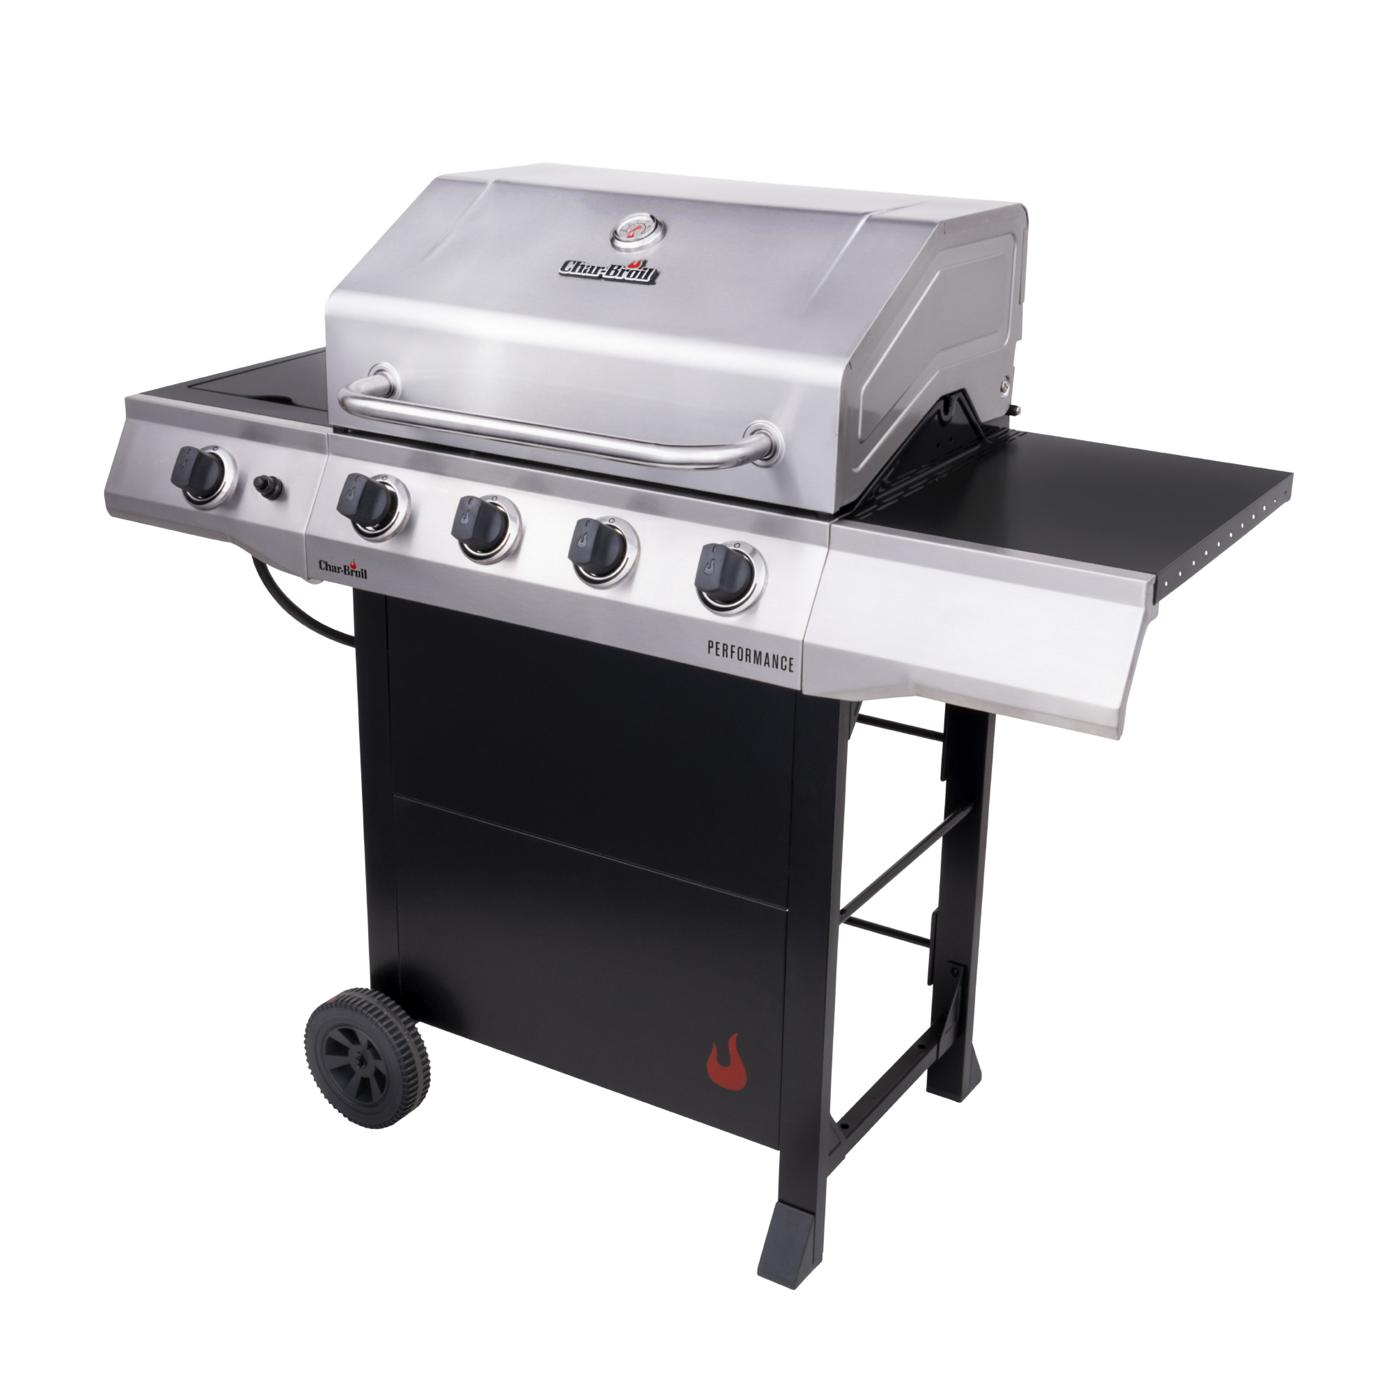 Char-Broil Performance Series 4-Burner Gas Grill; image 2 of 3